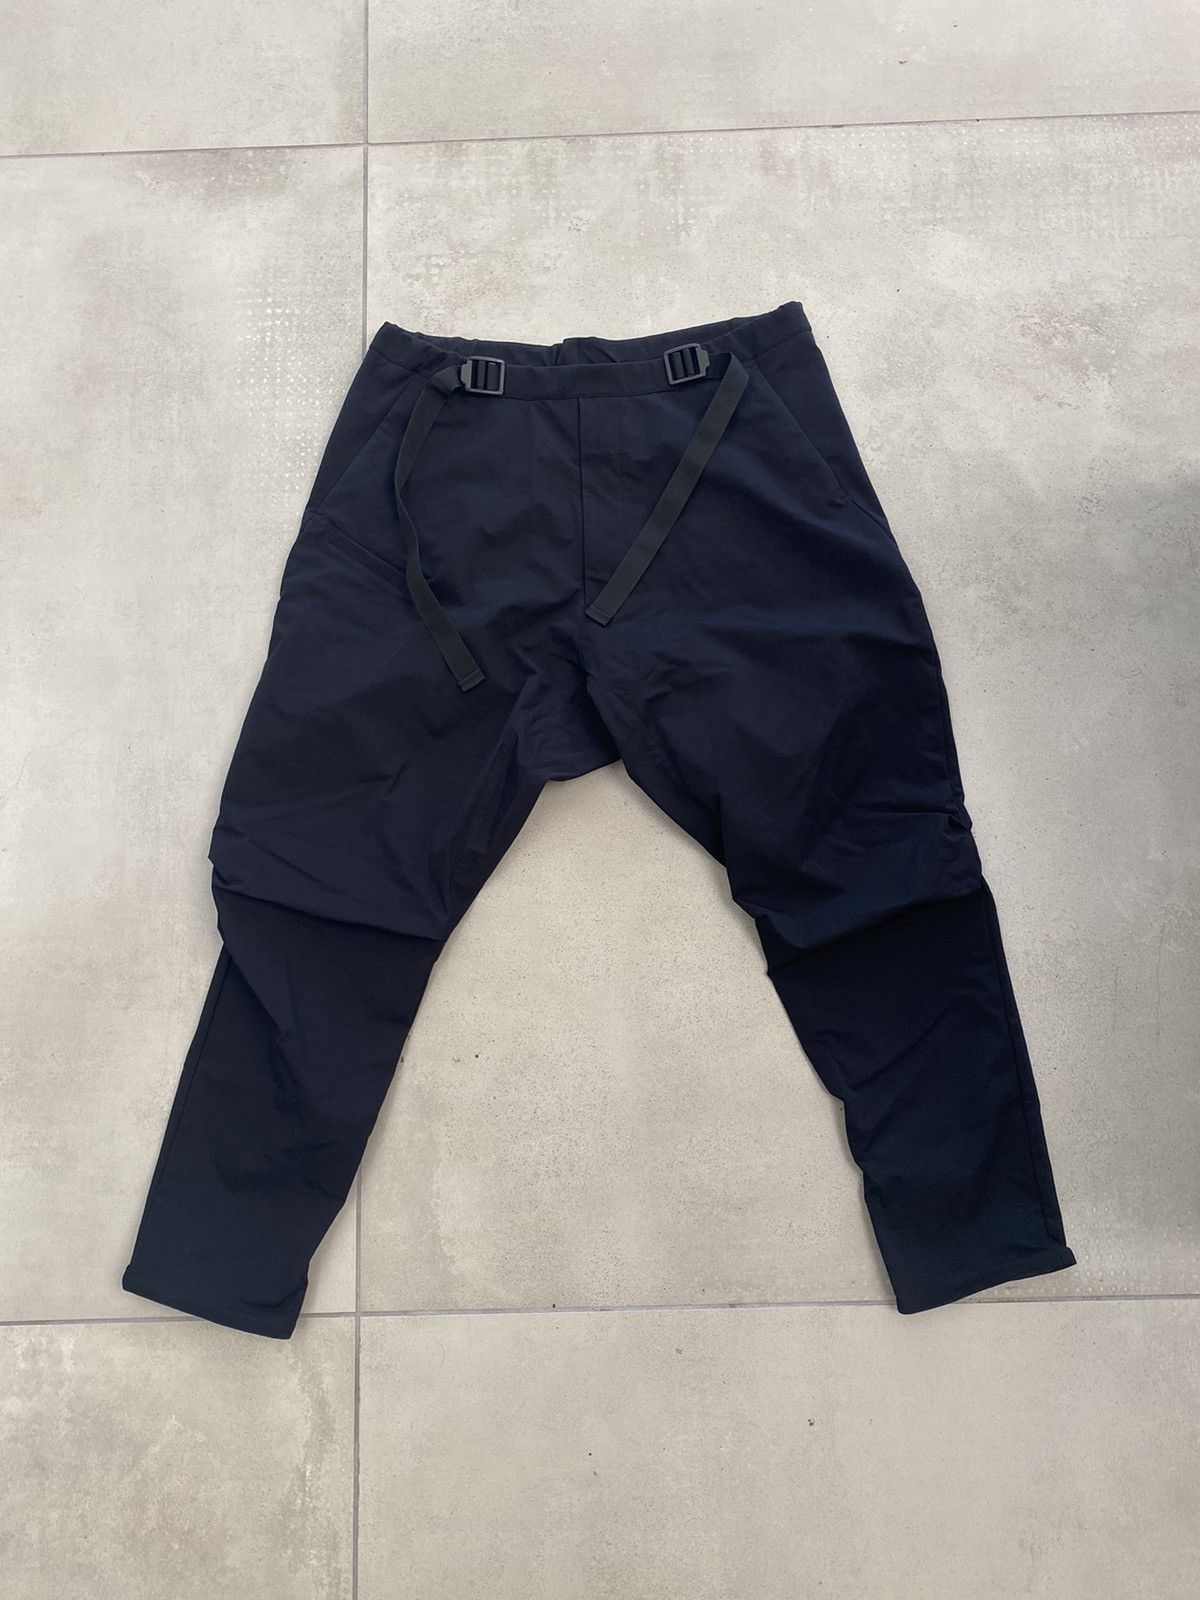 Acronym P15-DS Small Pants (Full-Pack) - 1